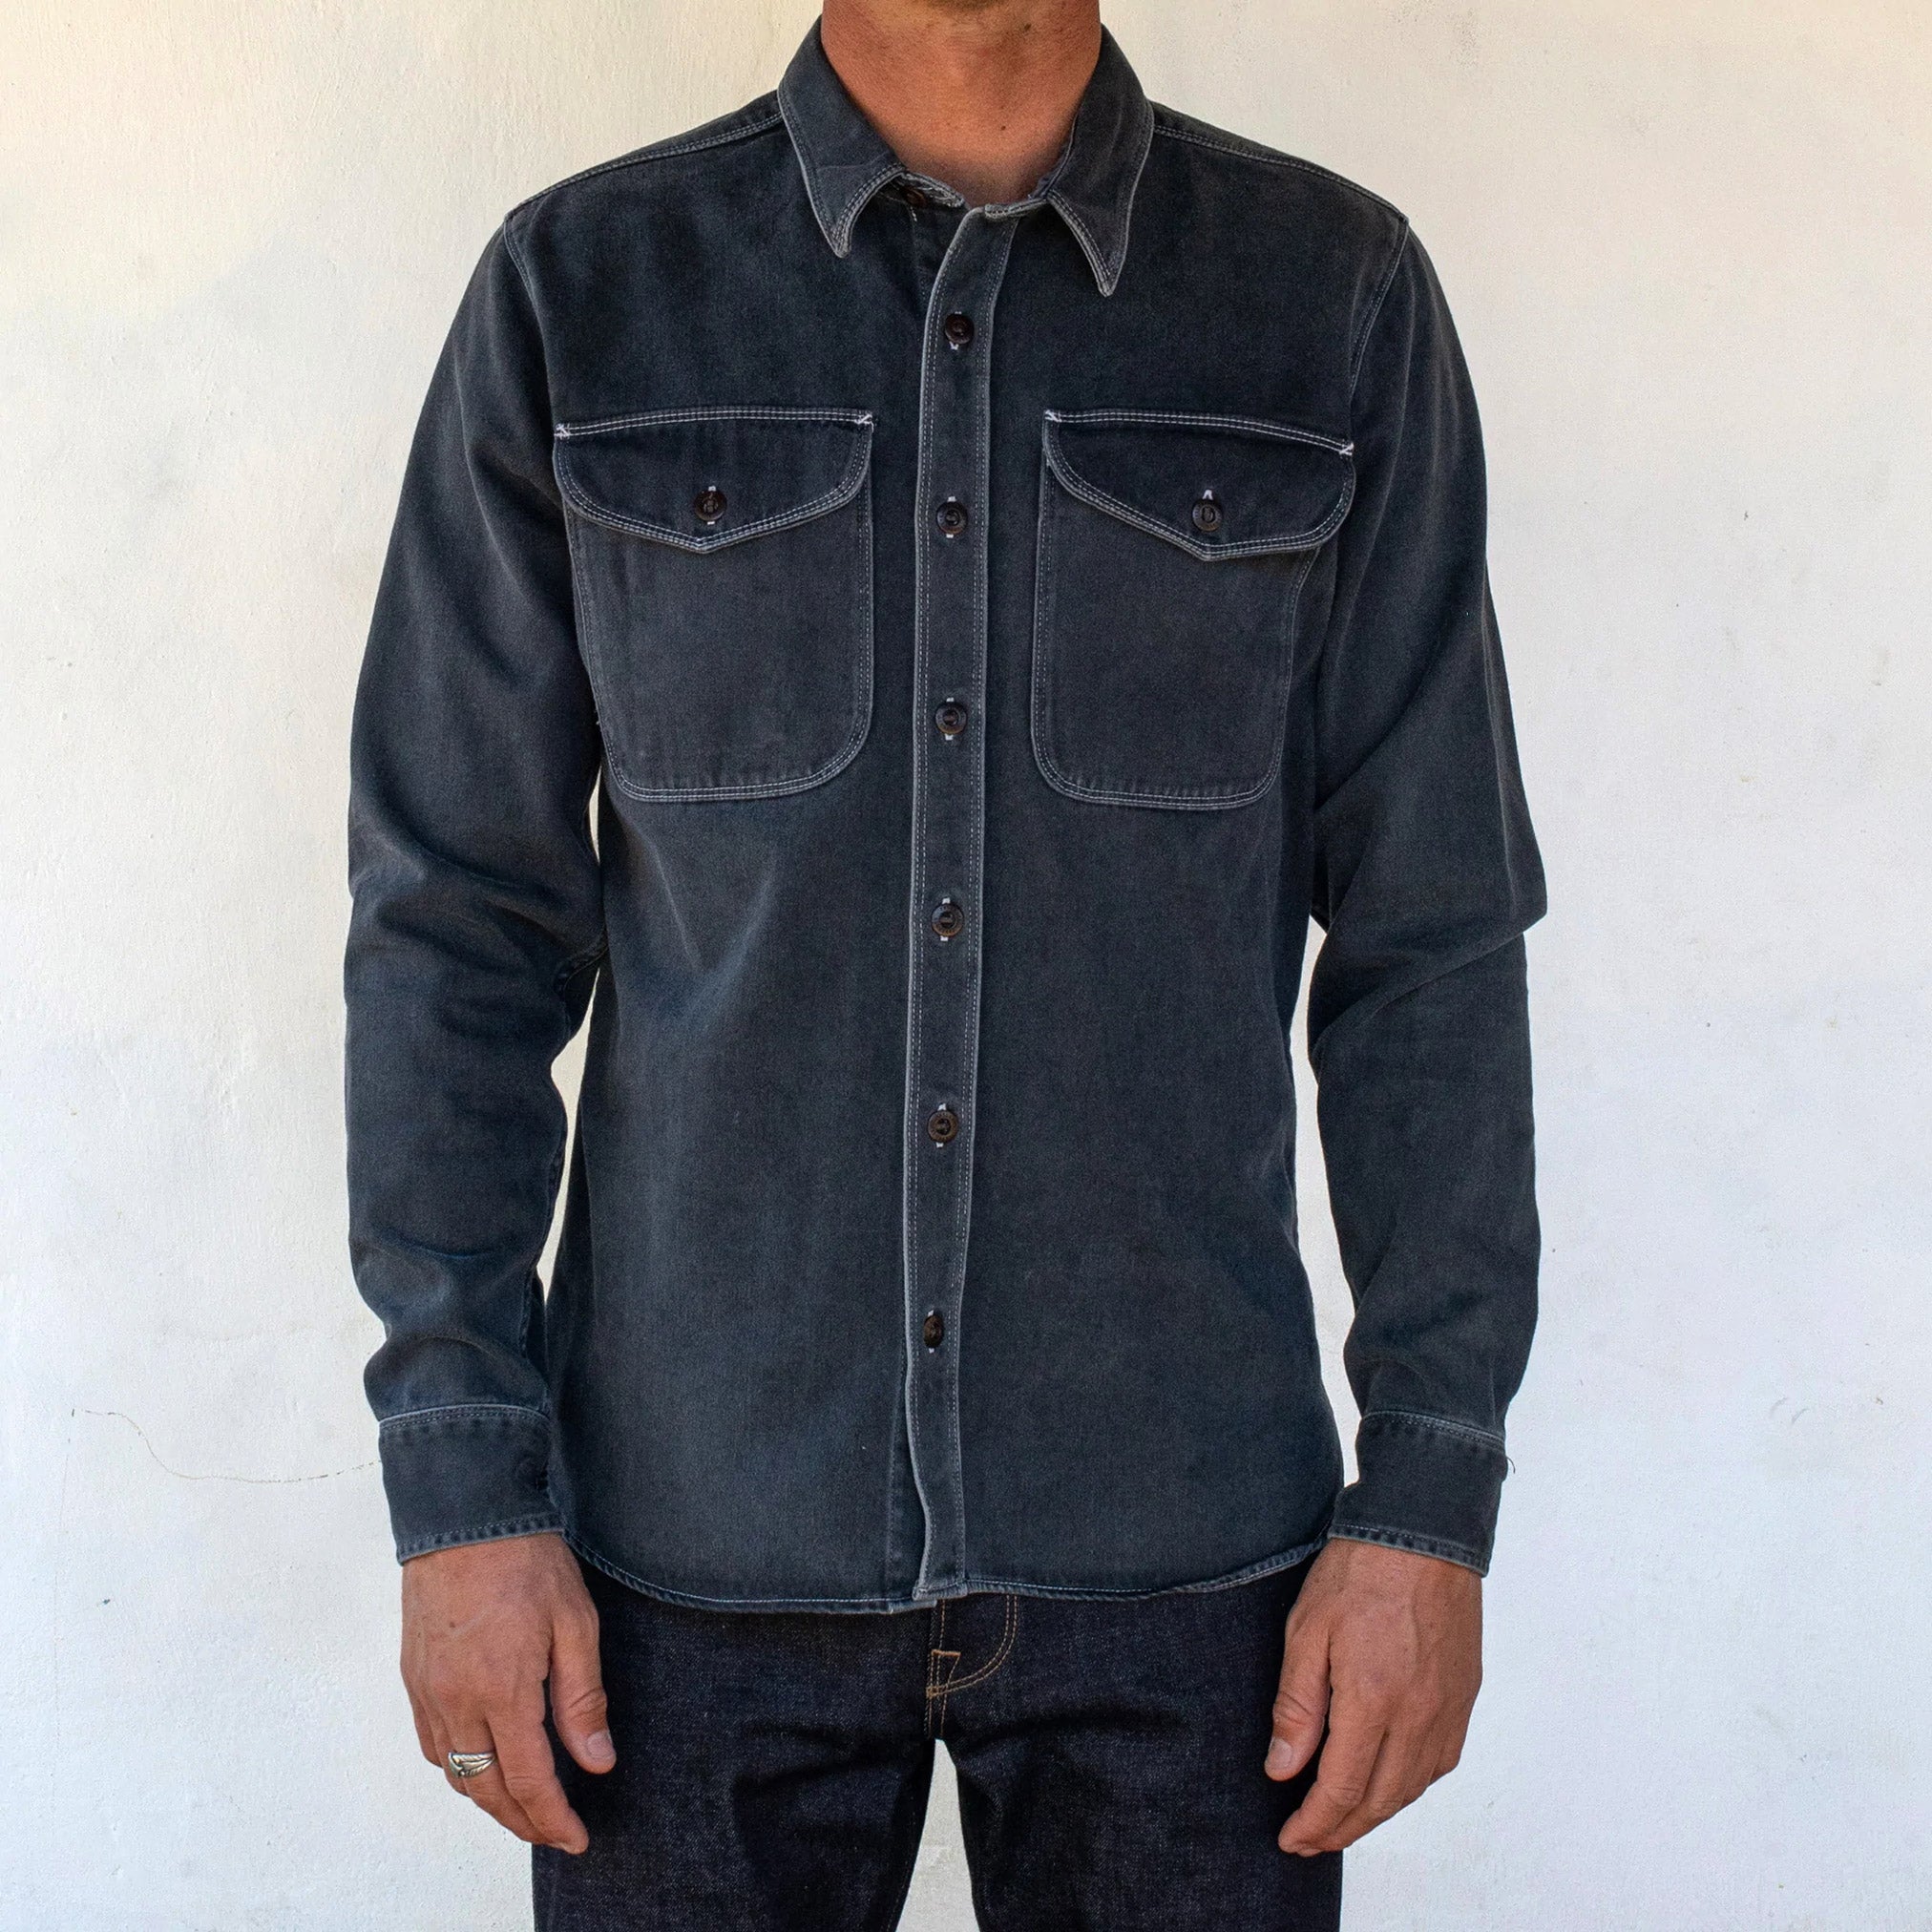 Utility Shirt in Charcoal